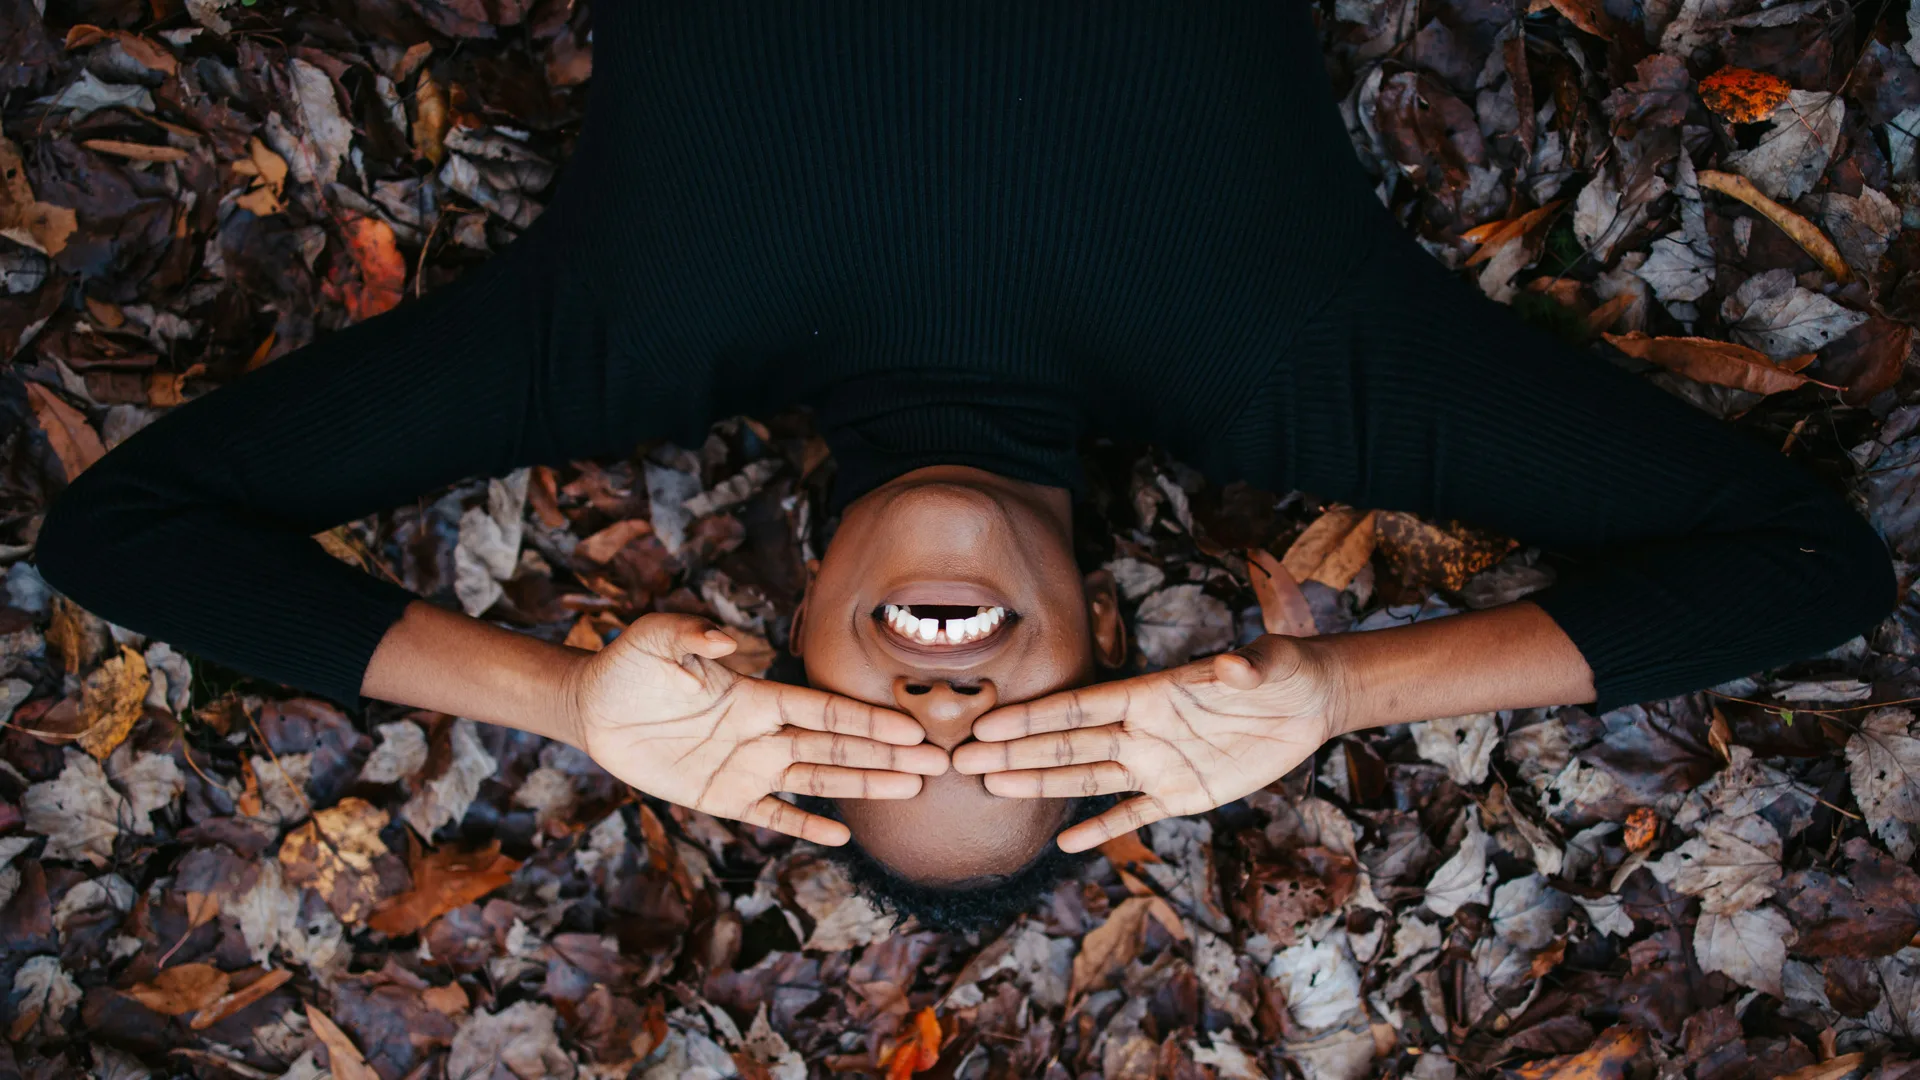 A woman lying on some leaves with her hands covering her eyes